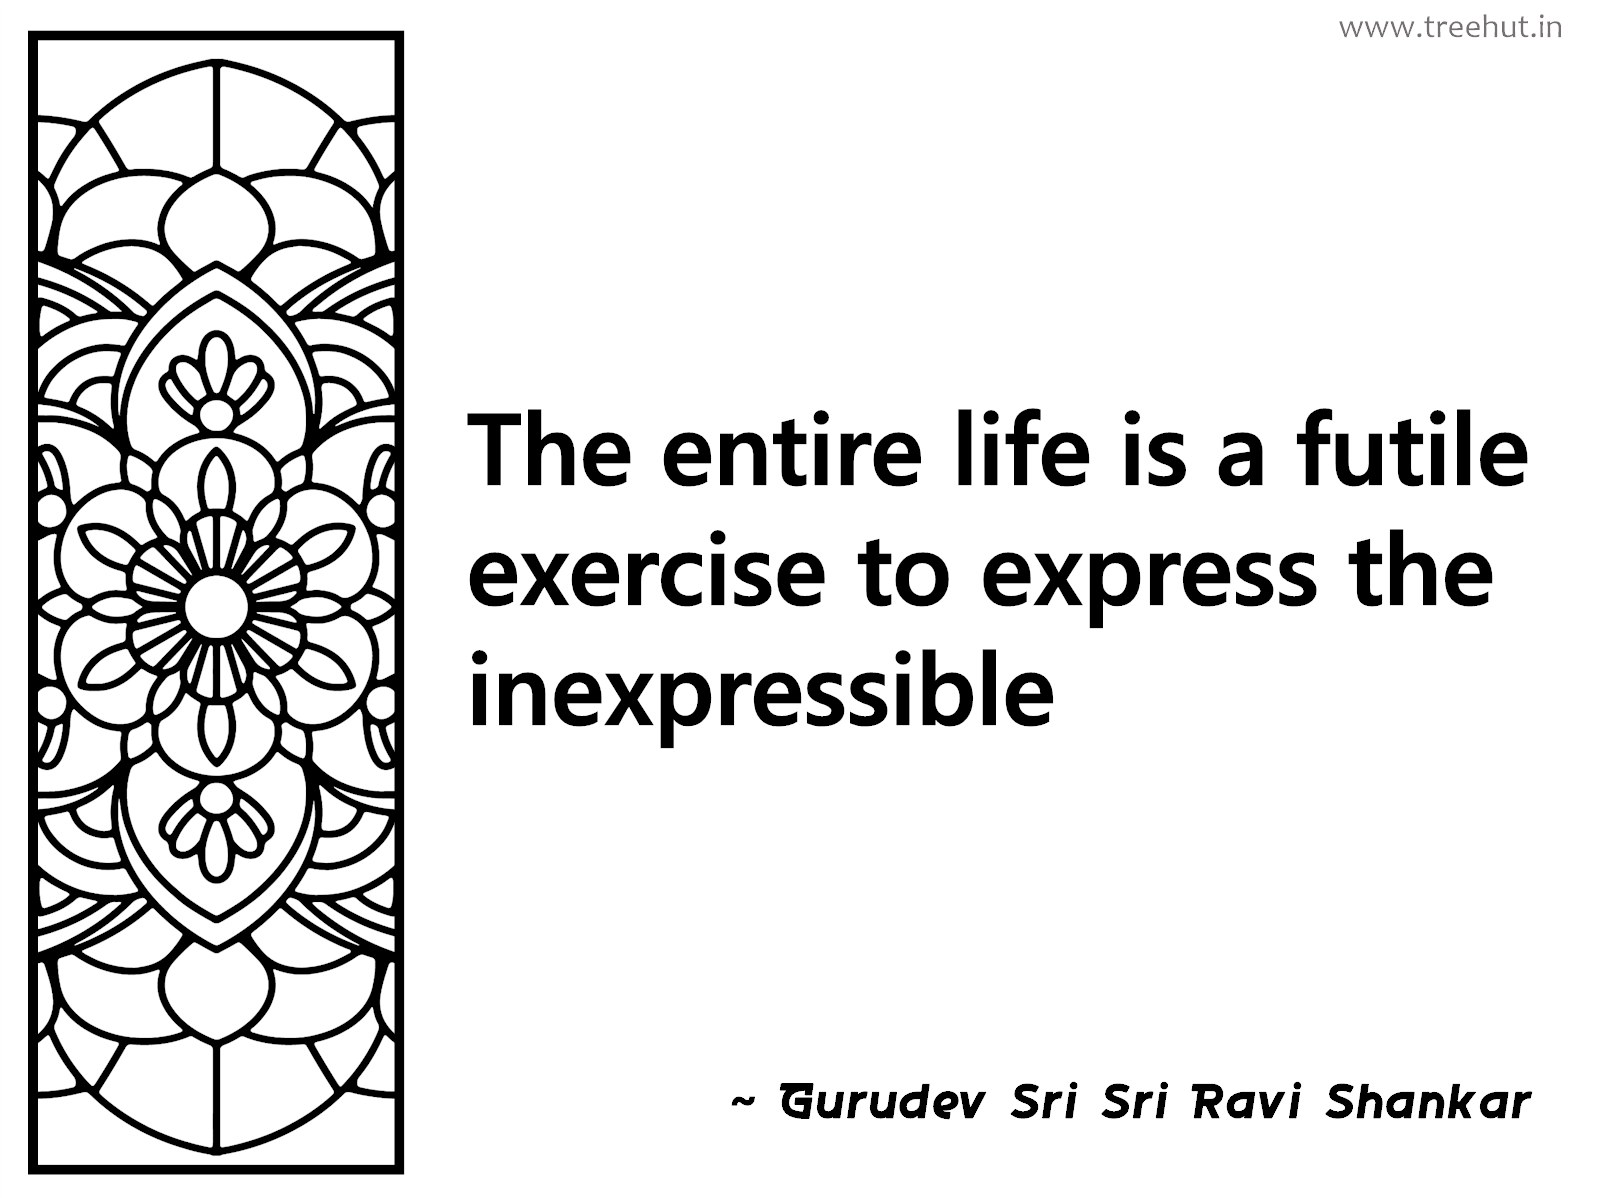 The entire life is a futile exercise to express the inexpressible Inspirational Quote by Gurudev Sri Sri Ravi Shankar, coloring pages